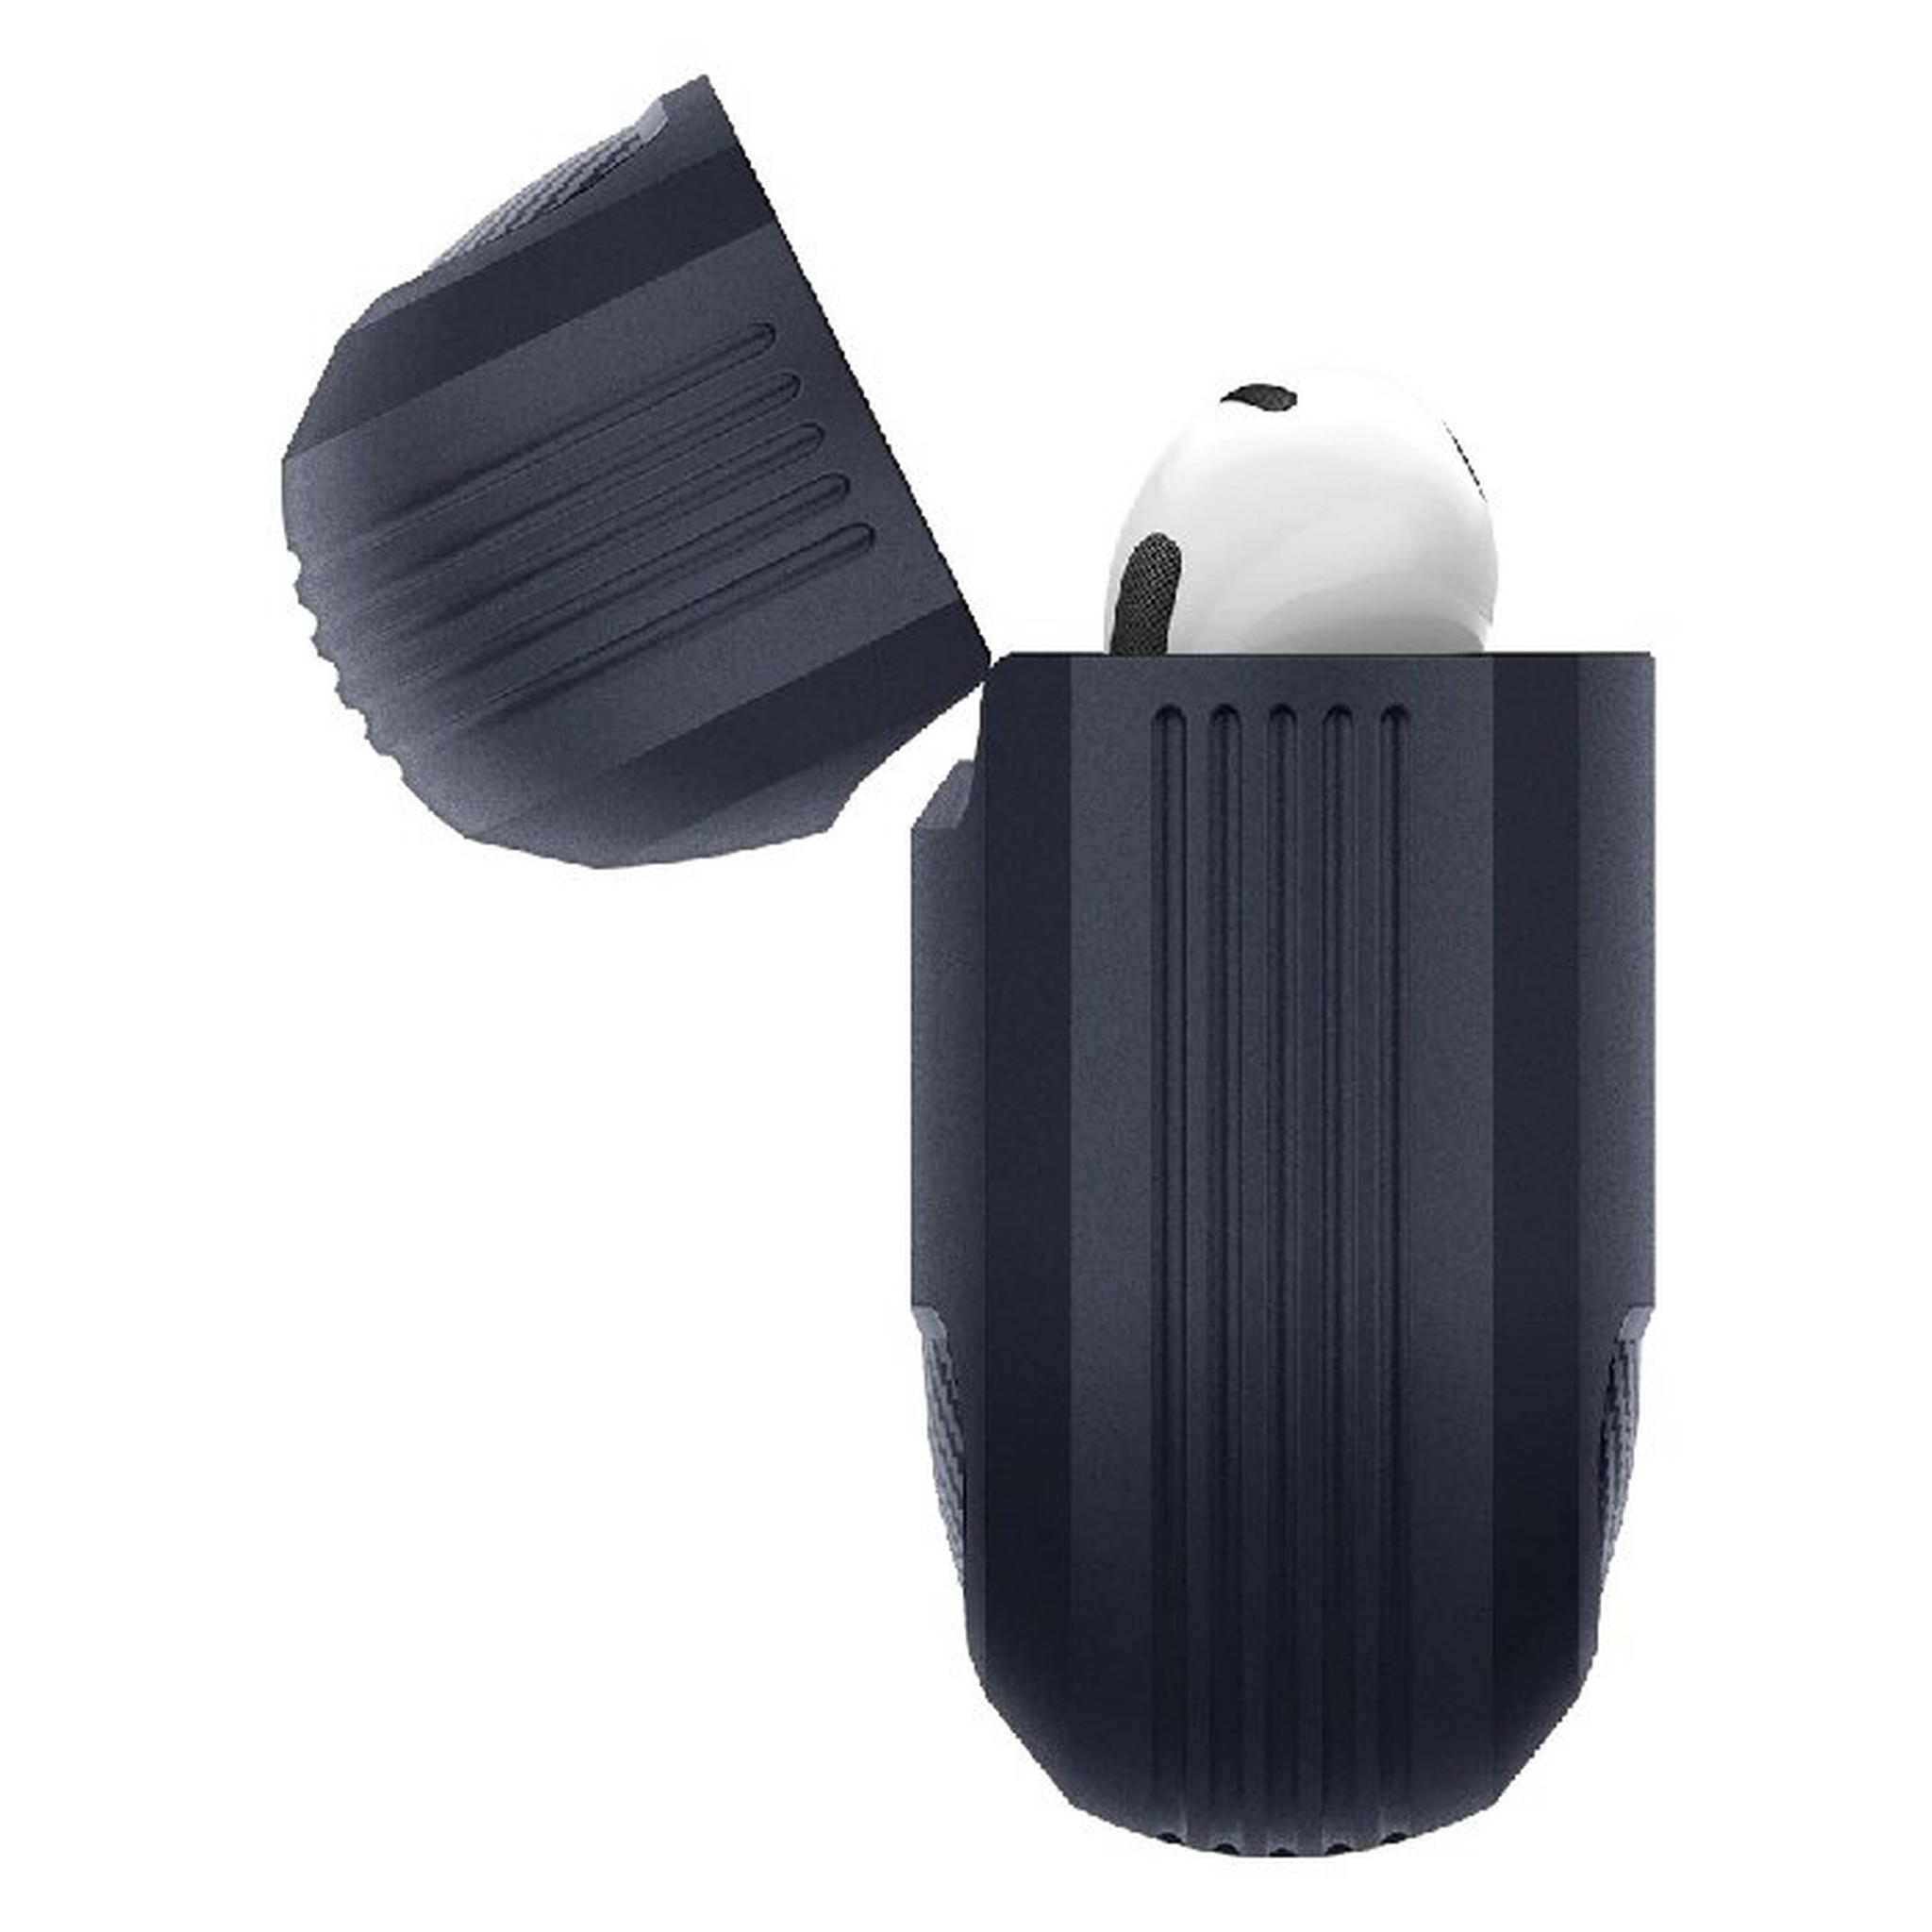 Spigen Rugged Armor Apple Airpods 3 Case - Charcoal Grey